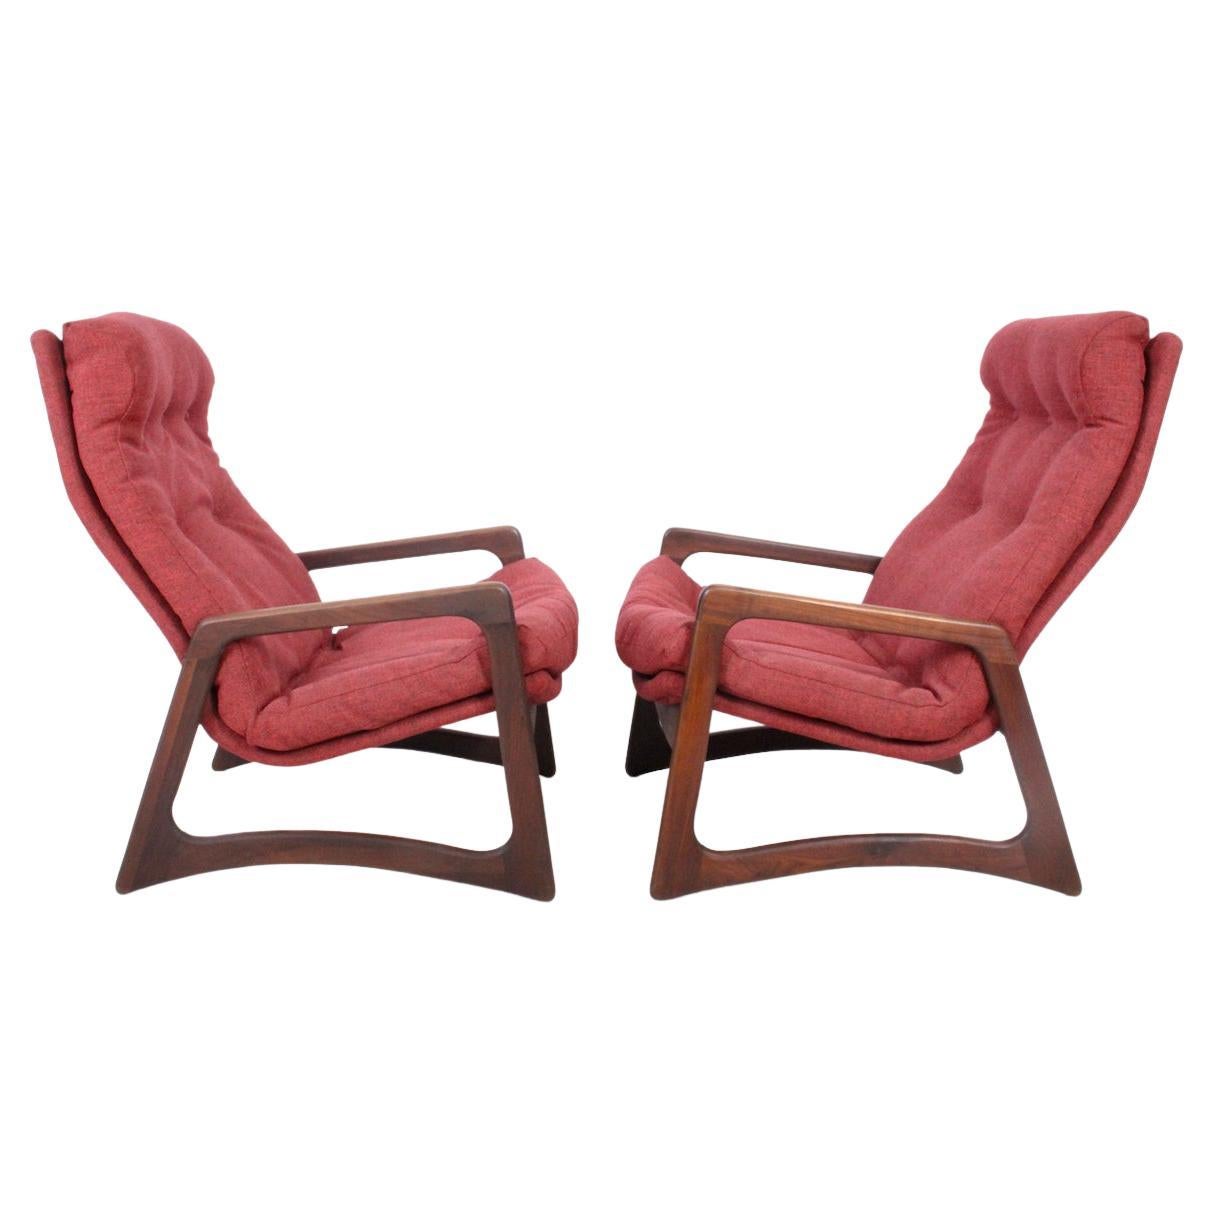 Pair of Adrian Pearsall for Craft Associates Walnut Lounge Chairs, 1960's For Sale